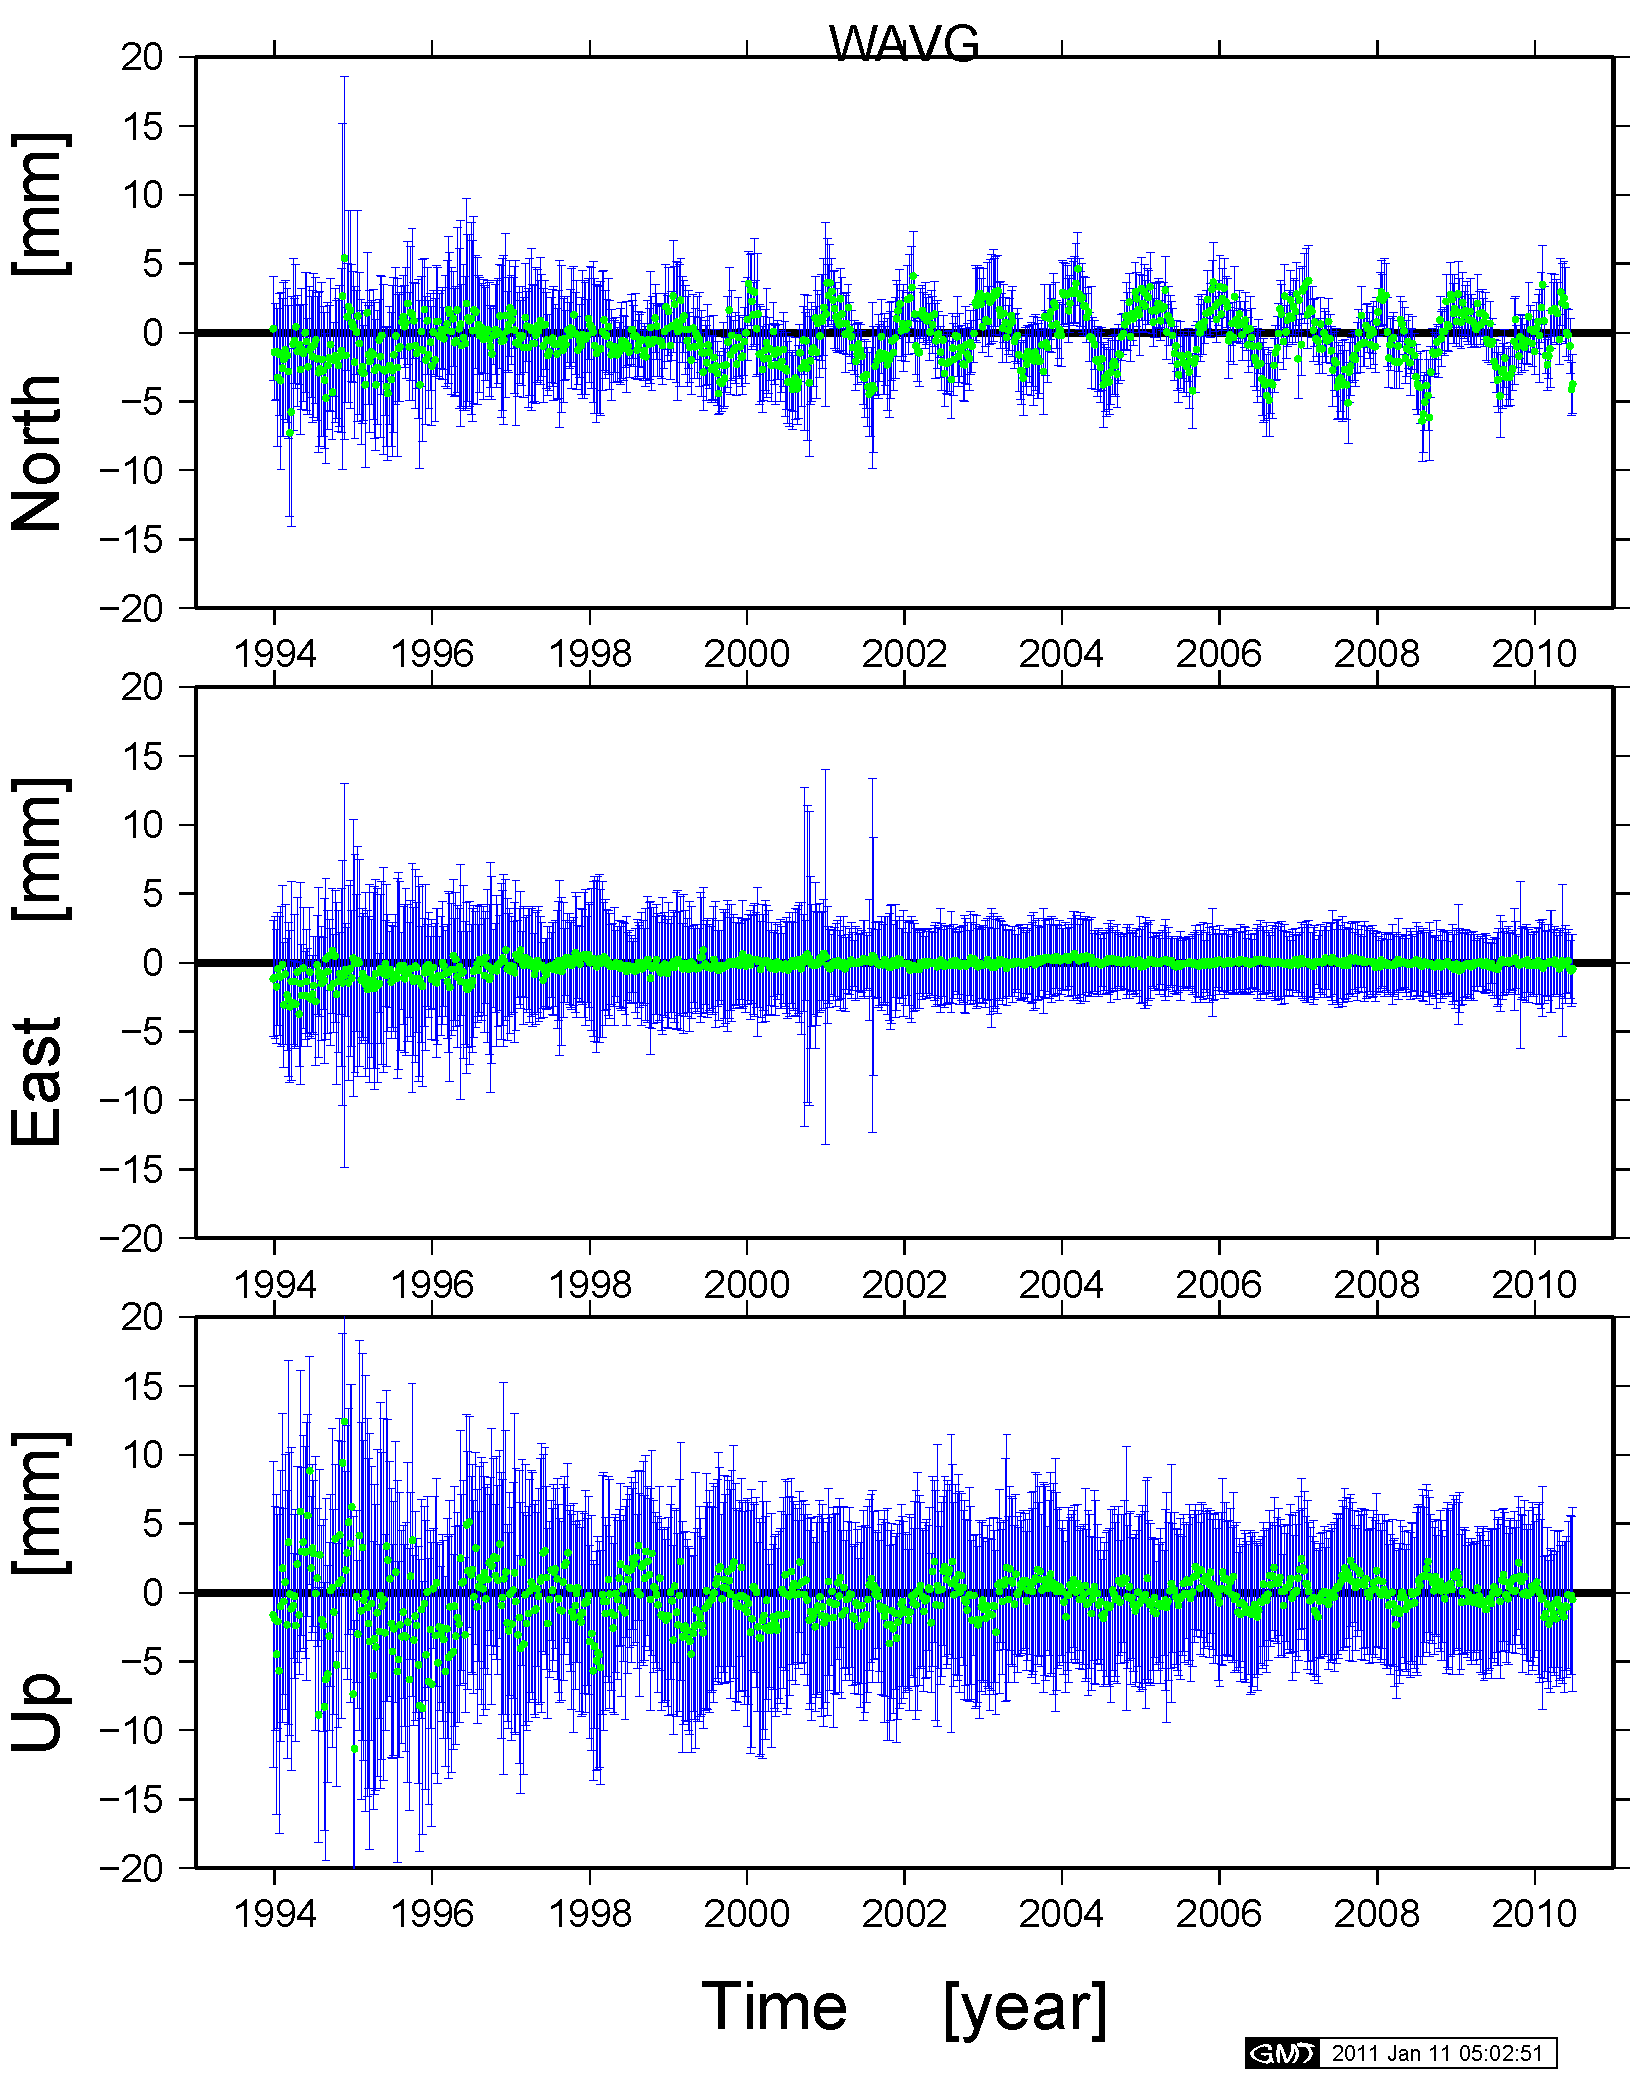 NCN stacking: Time-series of the weighted-average of the coordinate residuals taken over the subnetwork